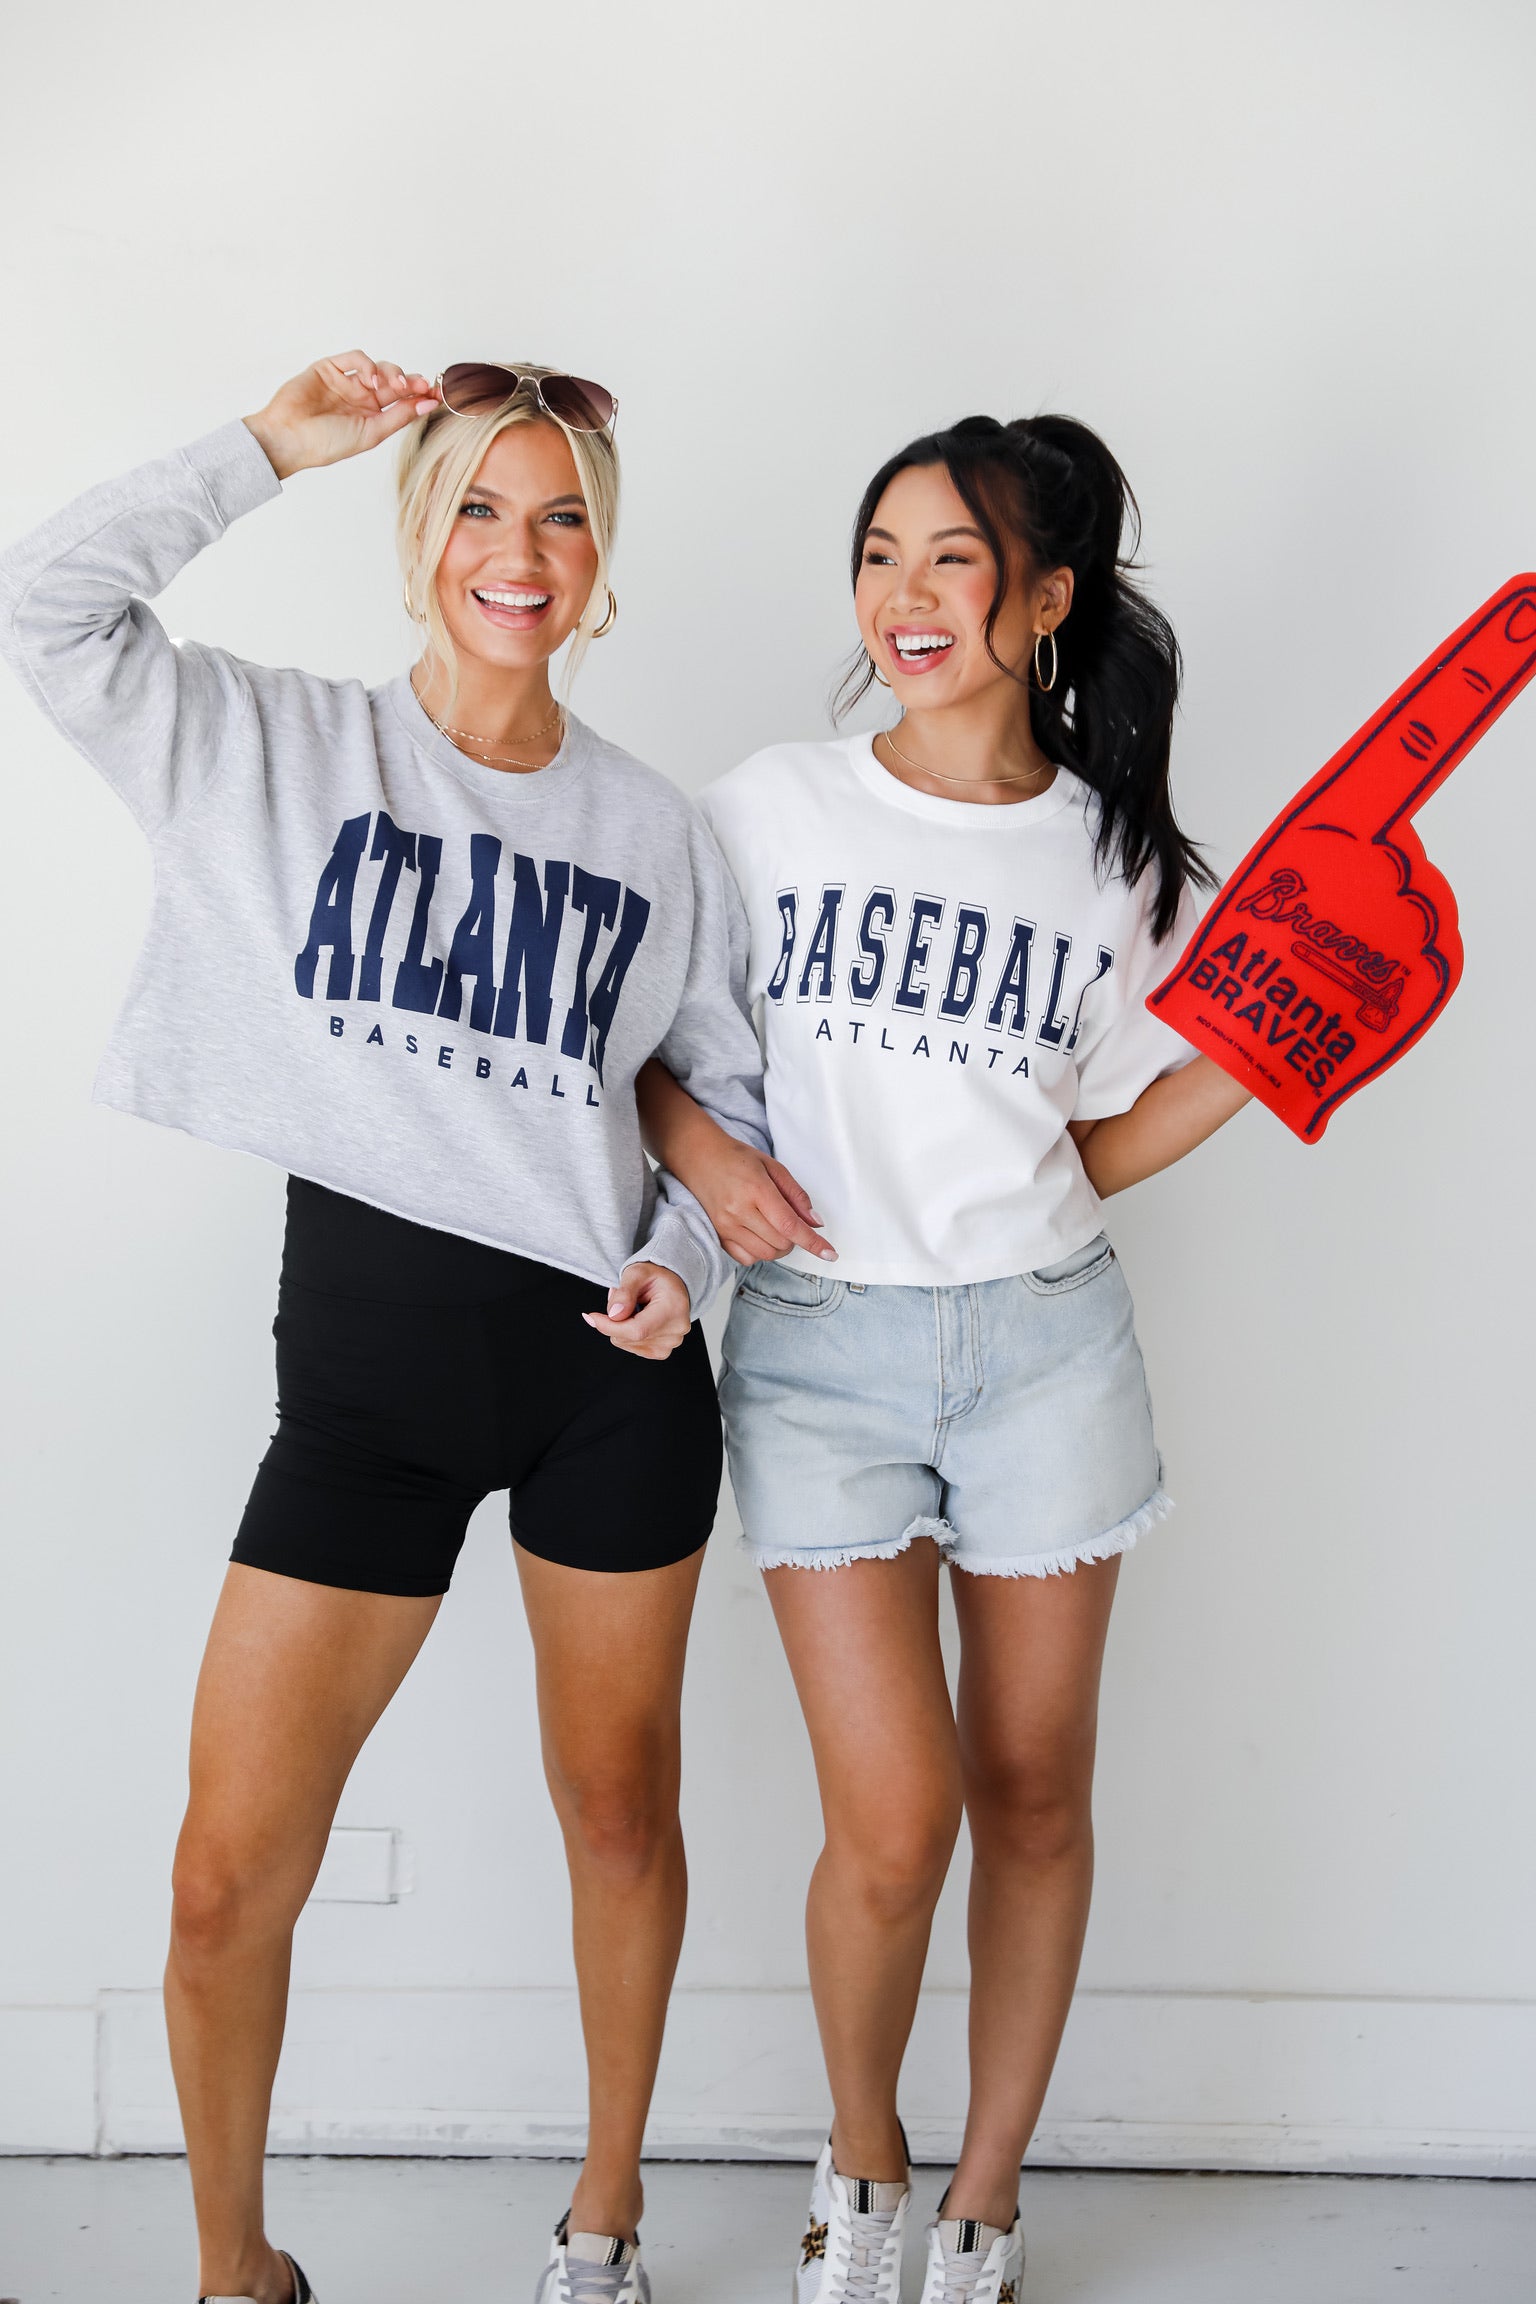 Atlanta Braves Game Day Outfit  Gameday outfit, Football game